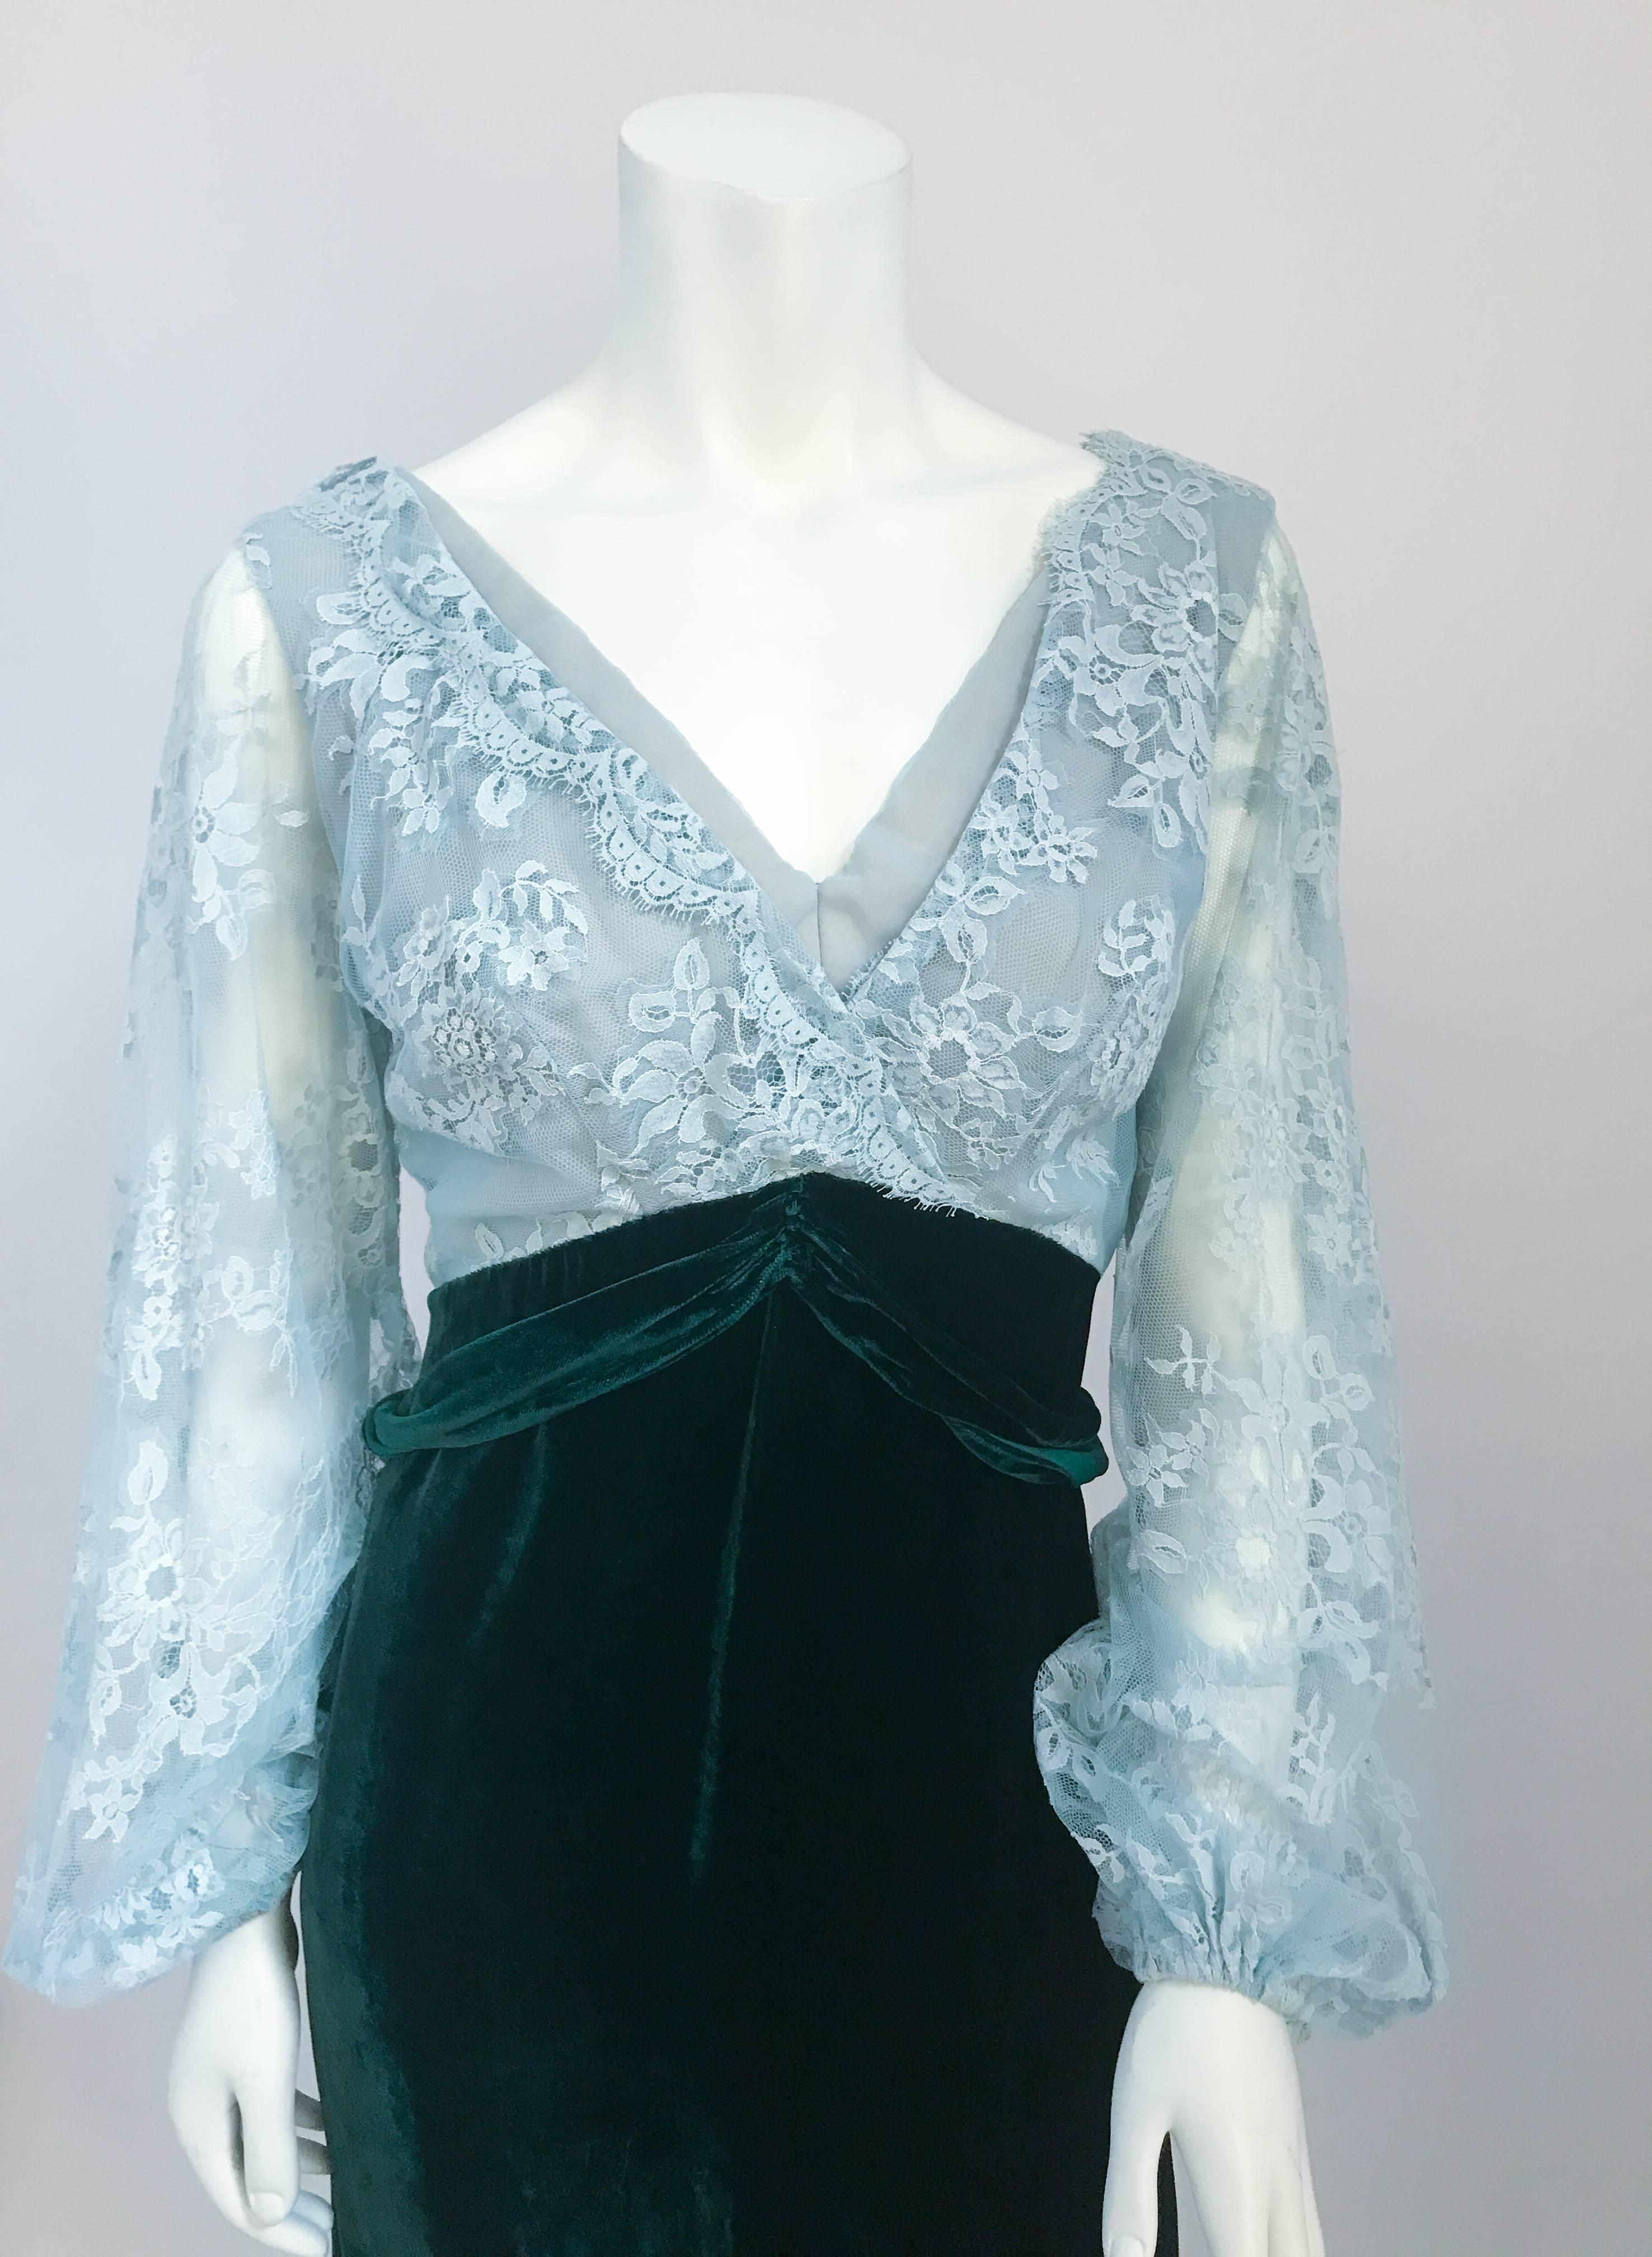 1960s Helen Rose Emerald Velvet and Pale Blue Lace Dress. Emerald silk Velvet and pale blue floral lace. Design. Empire style sleeves with sash included for the waist line. Helen Rose was a famous designer who made several pieces for Elizabeth